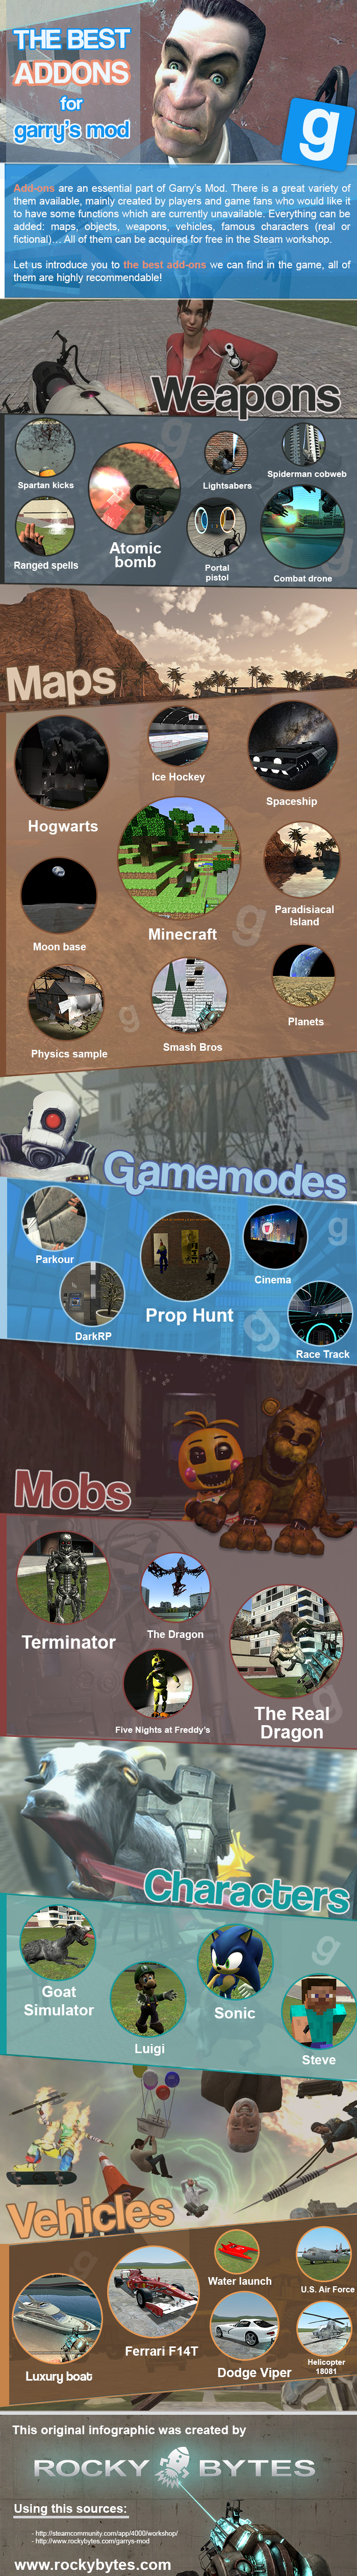 is there any mandatory addons for gmod